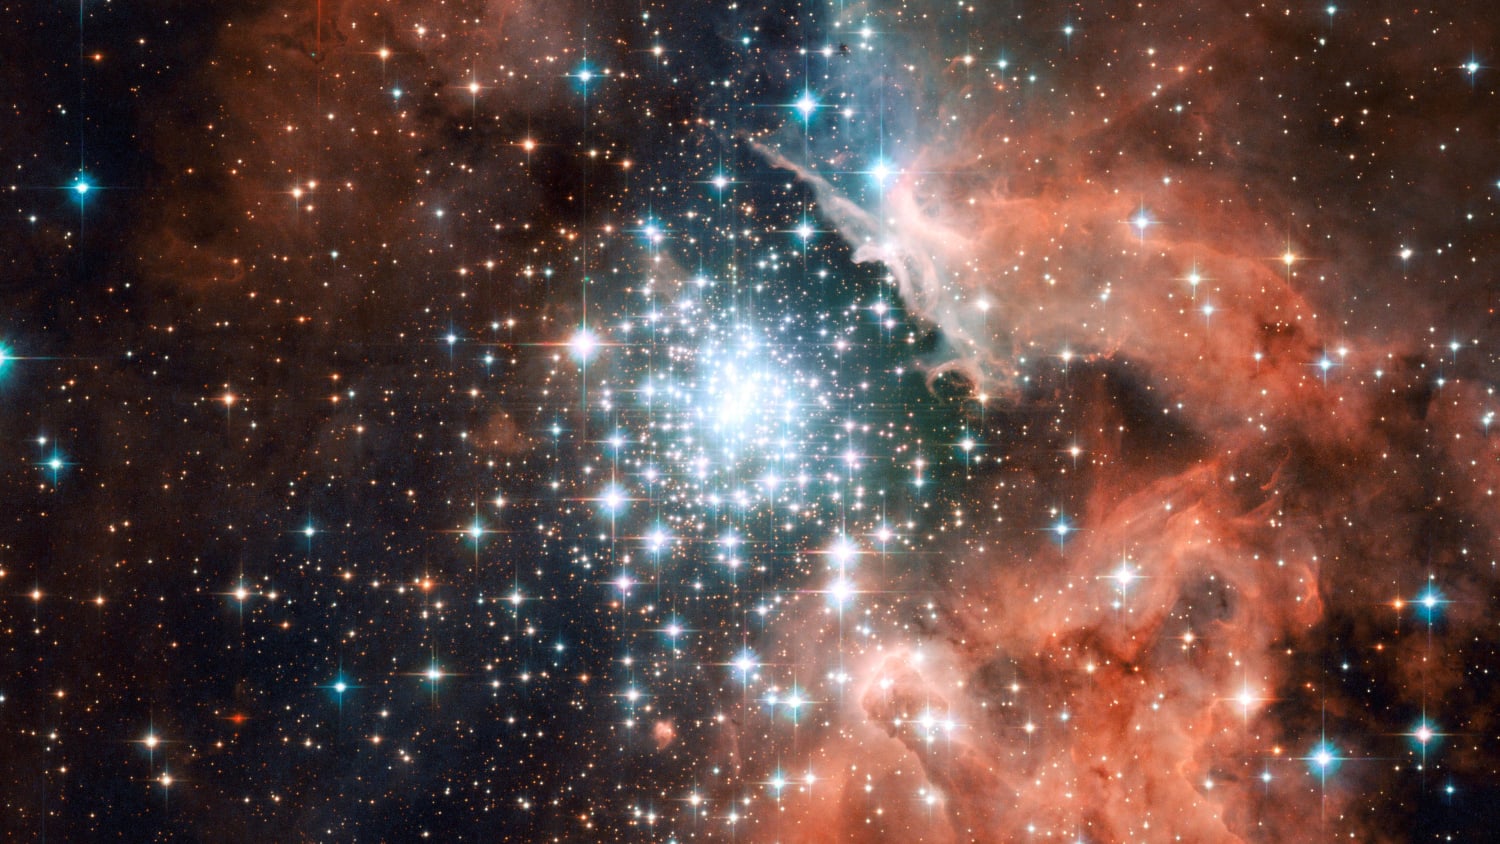 Hubble - Extreme Star Cluster